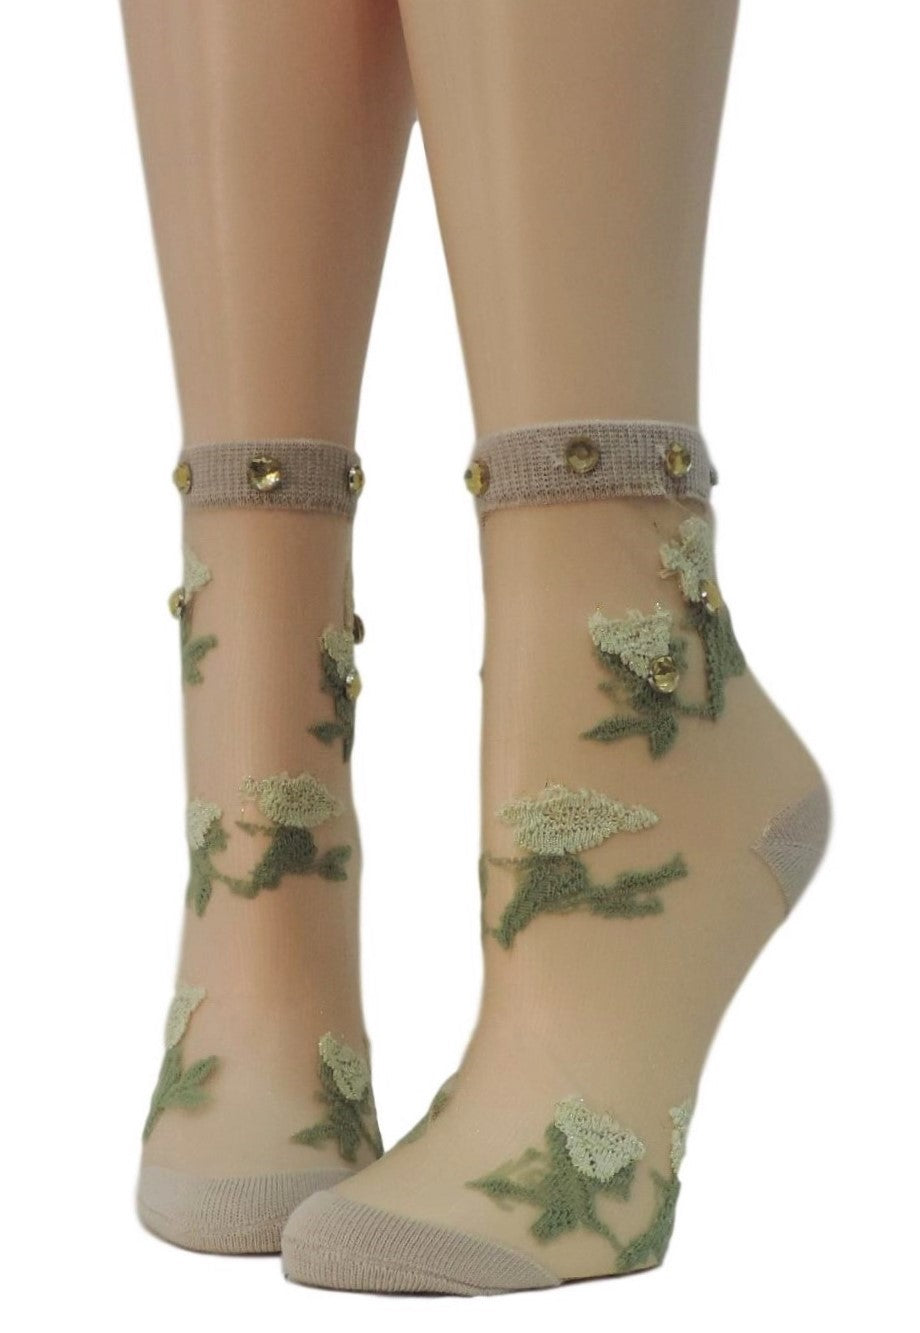 Snazzy Green Flowers Sheer Socks with beads